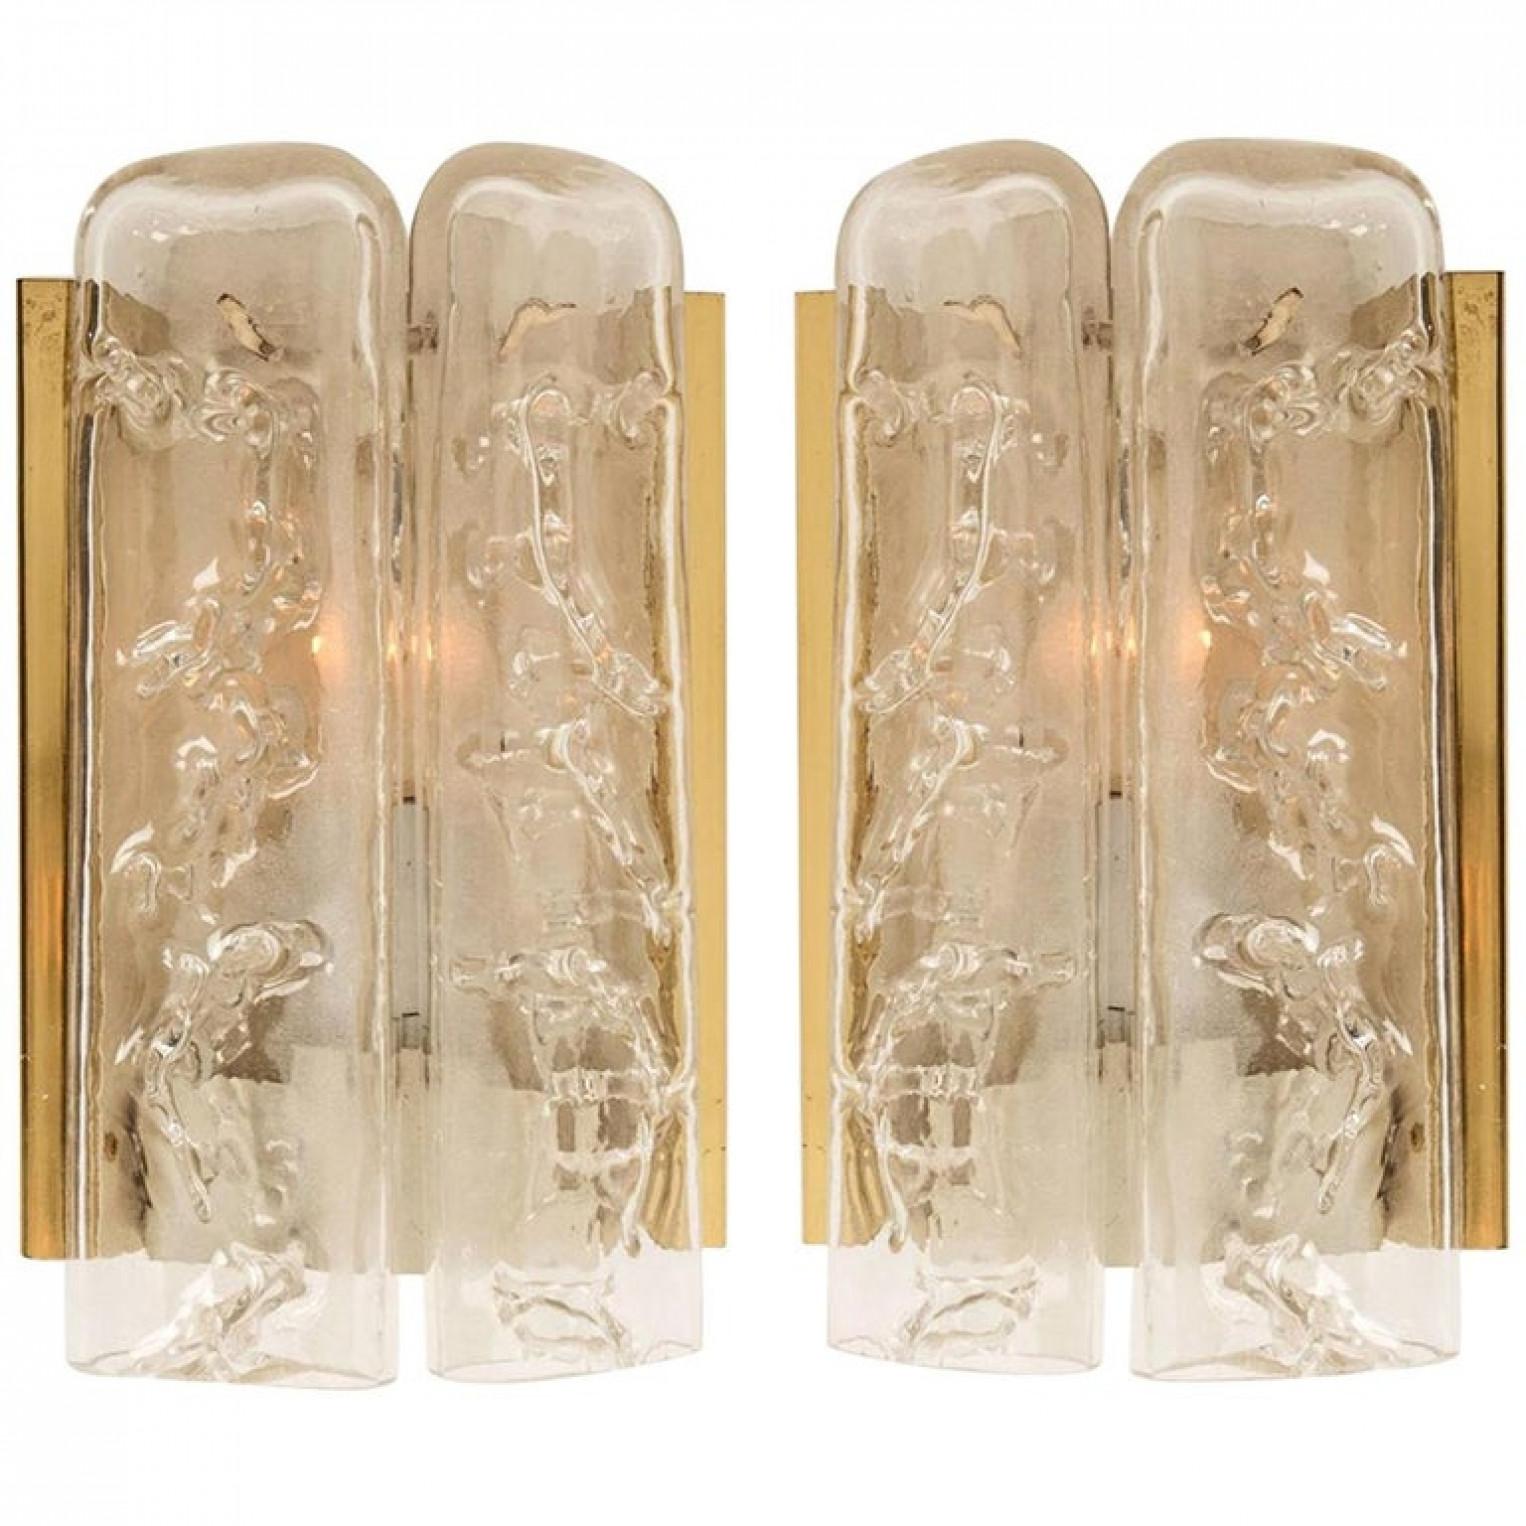 This set of blown wall sconces date from the 1960s and were created by the iconic firm of Doria Leuchten in Germany. They are fabricated with a backplate in white and brass and with two molten-glass, flat tubular prisms. High-end pieces

Two sizes